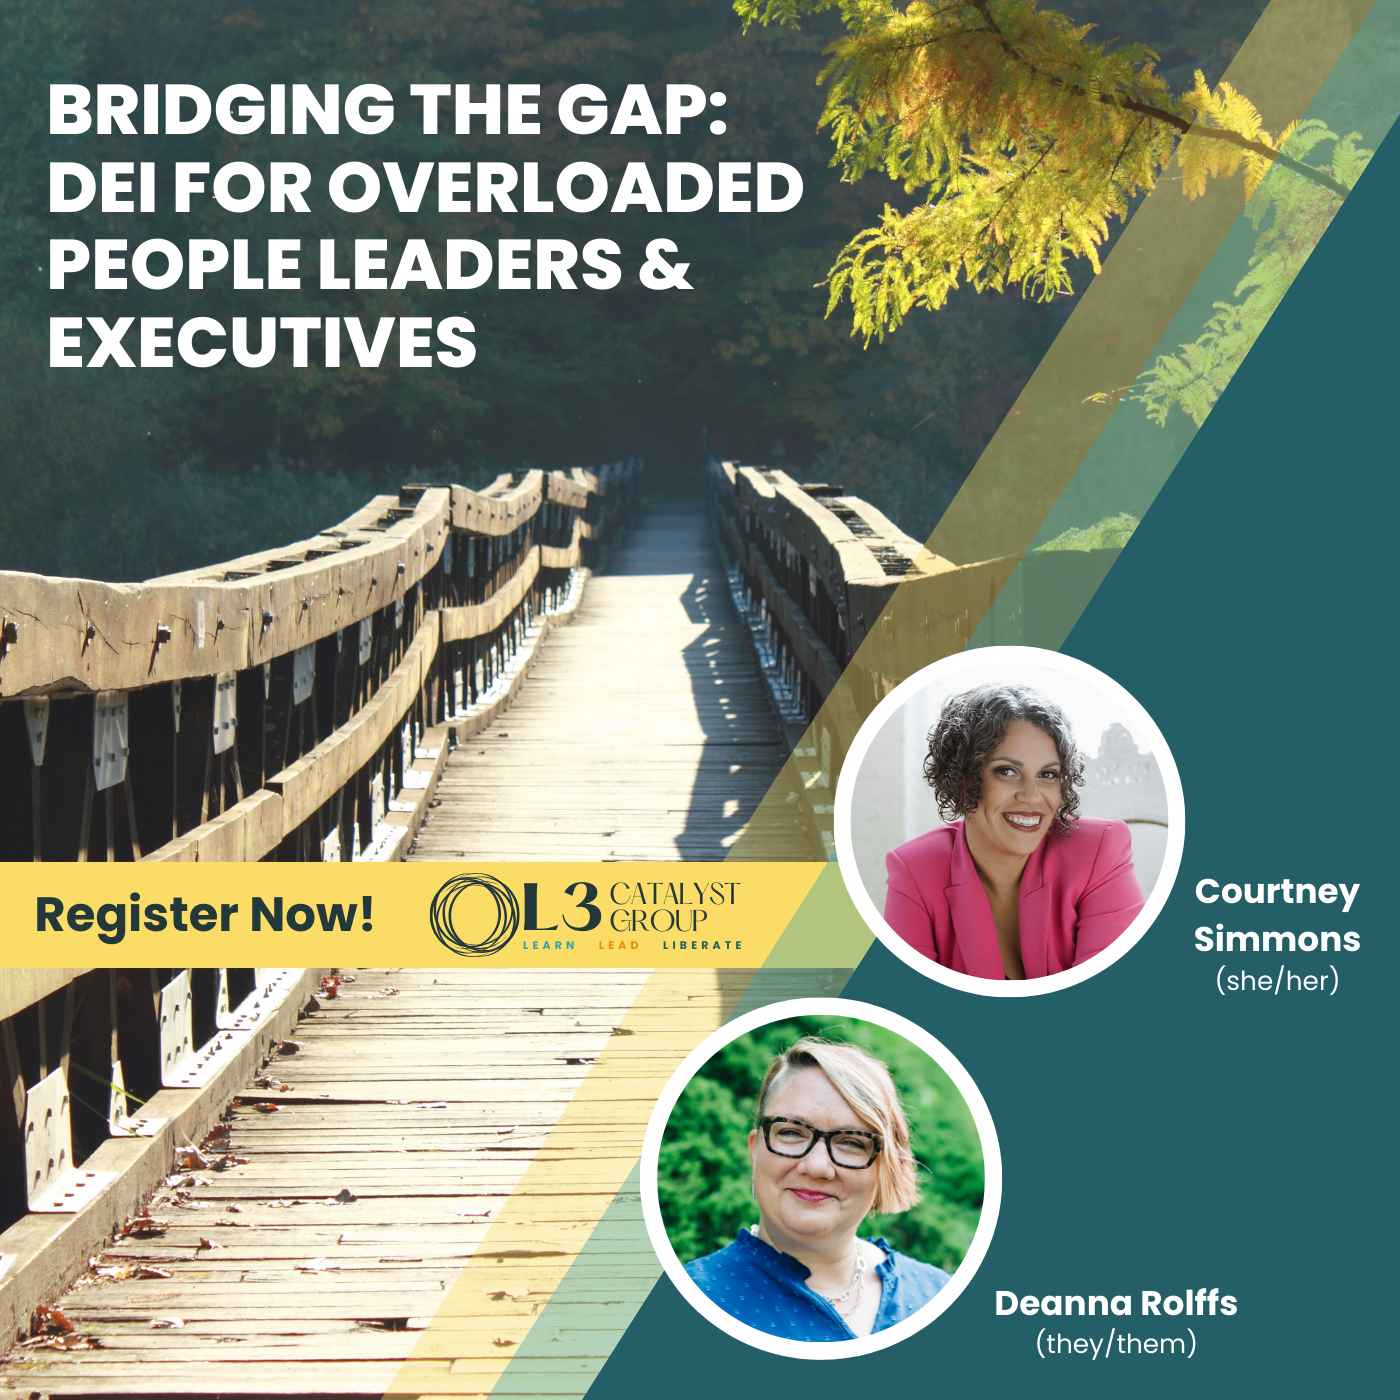 Bridging the Gap for Overloaded DEI and People Leaders